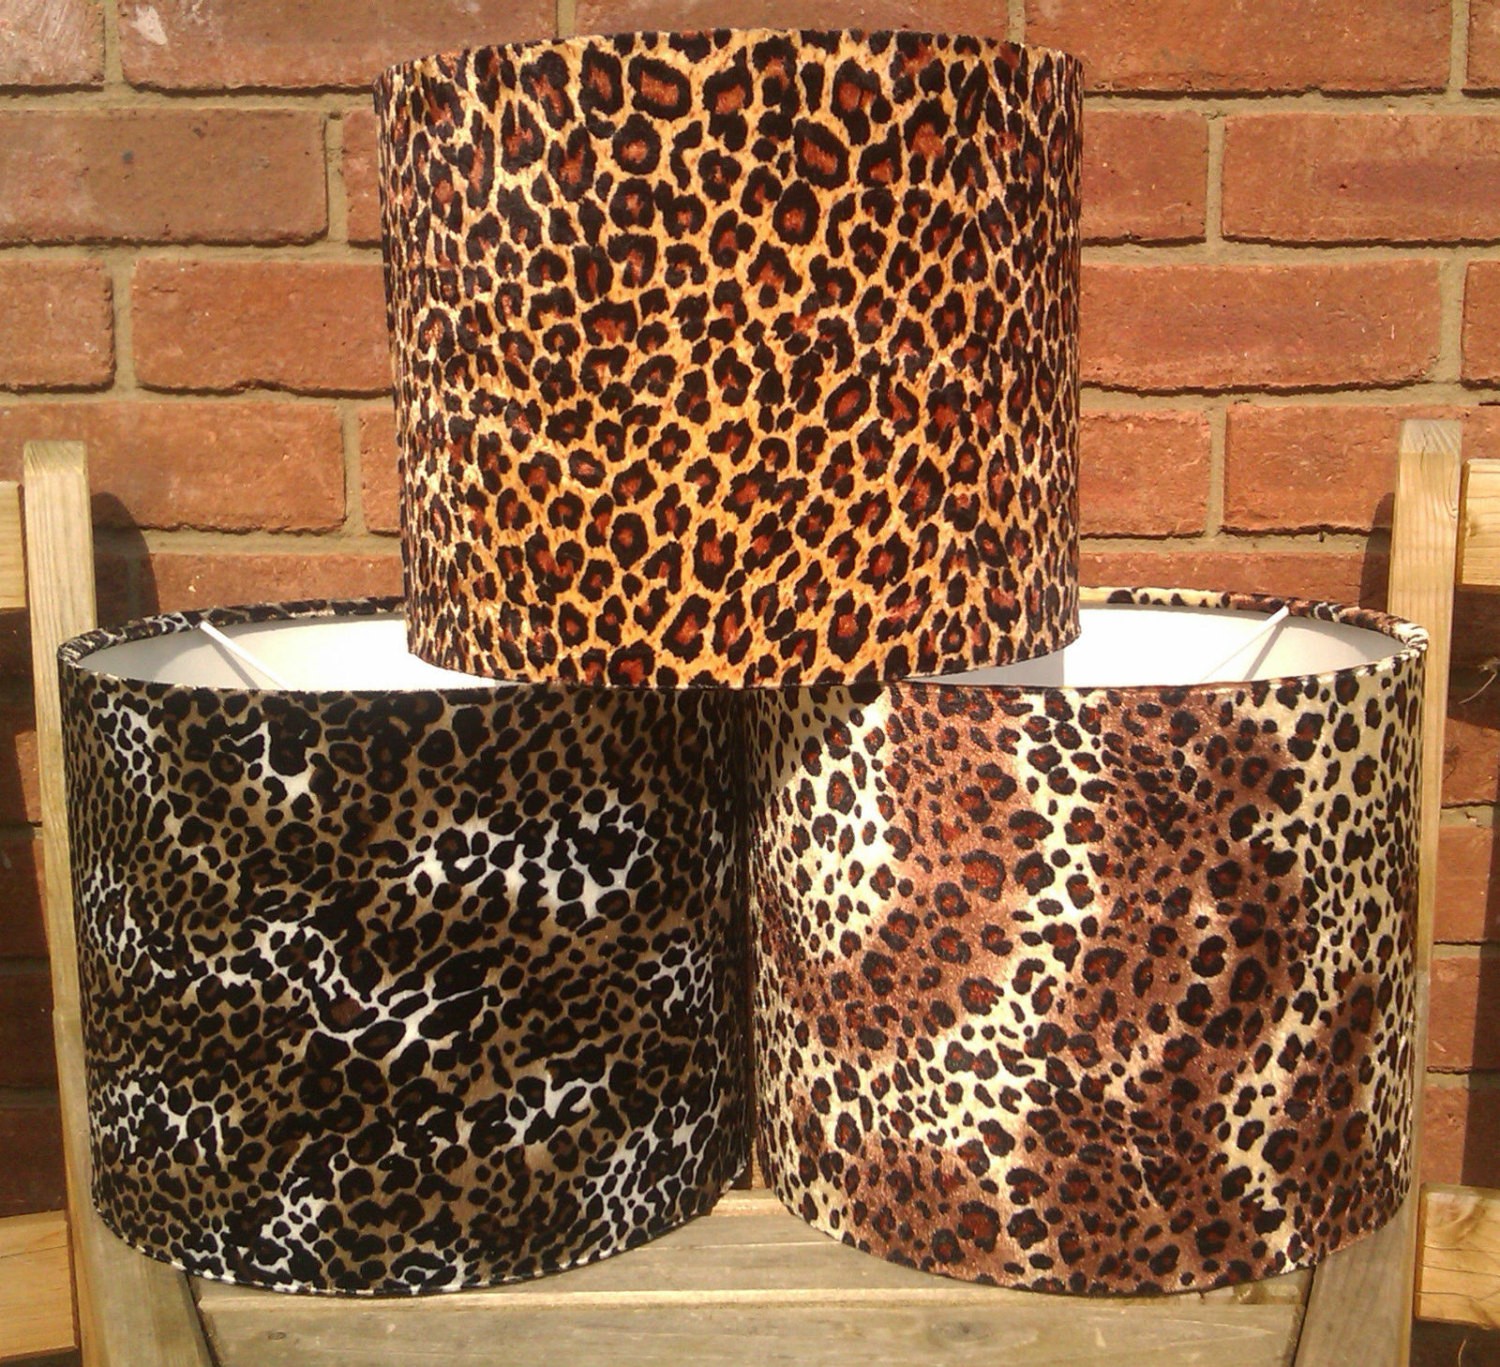 12 leopard print velour drum lamp light shades fits by